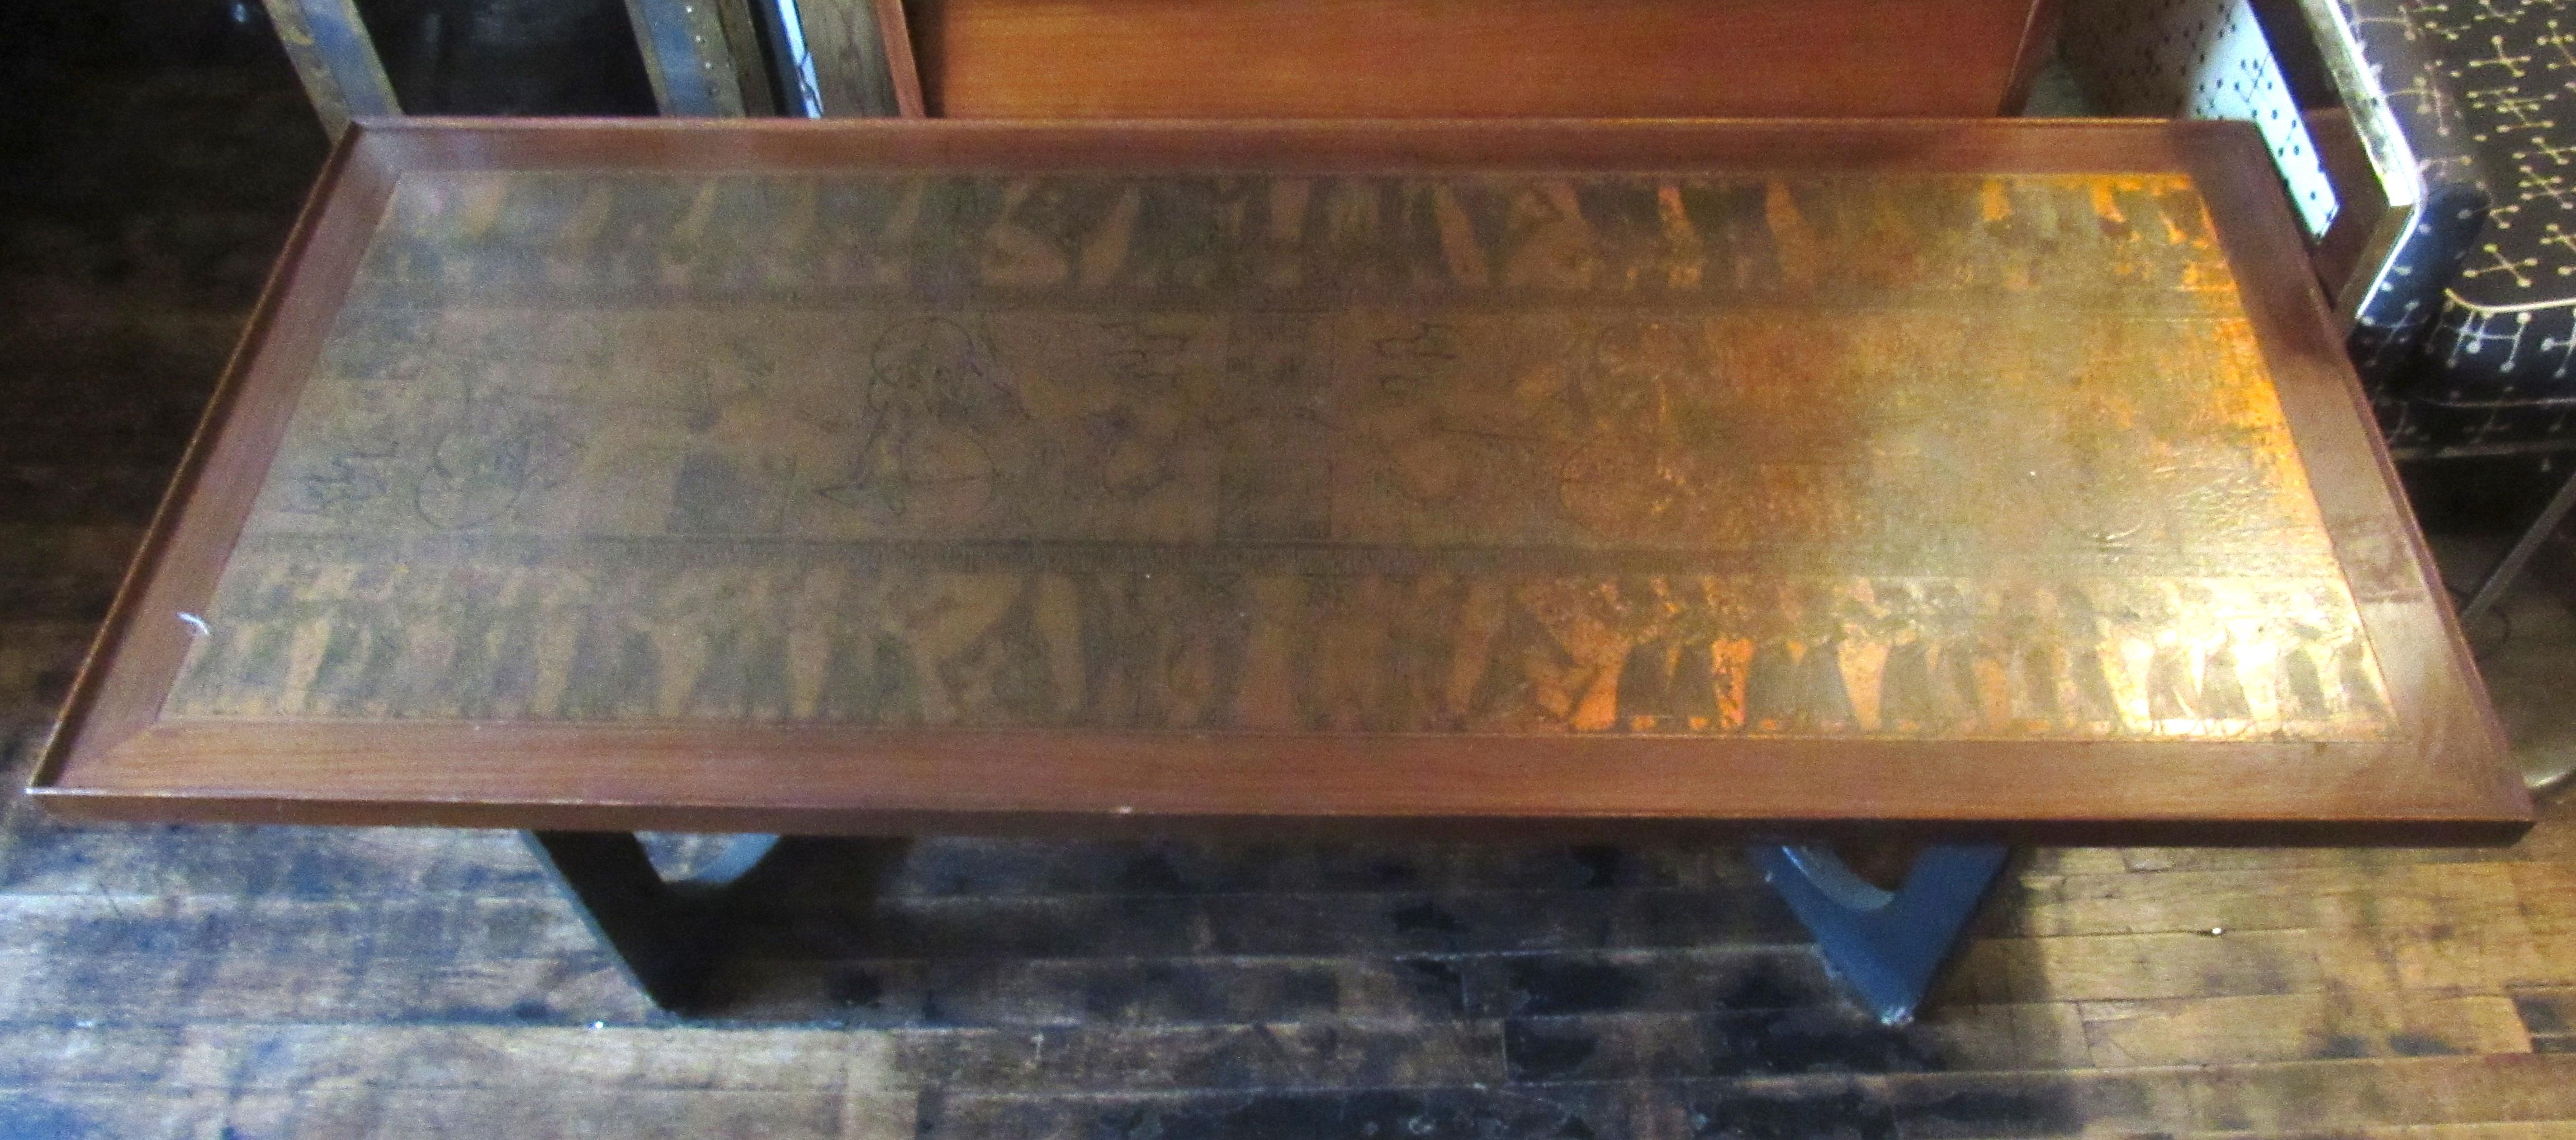 Beautiful unique vintage modern coffee table. This wood coffee table features a copper finished metal inlay embossed with beautiful Egyptian style hieroglyph artwork. The table sits on sculptural black wood legs. This stunning table would make a